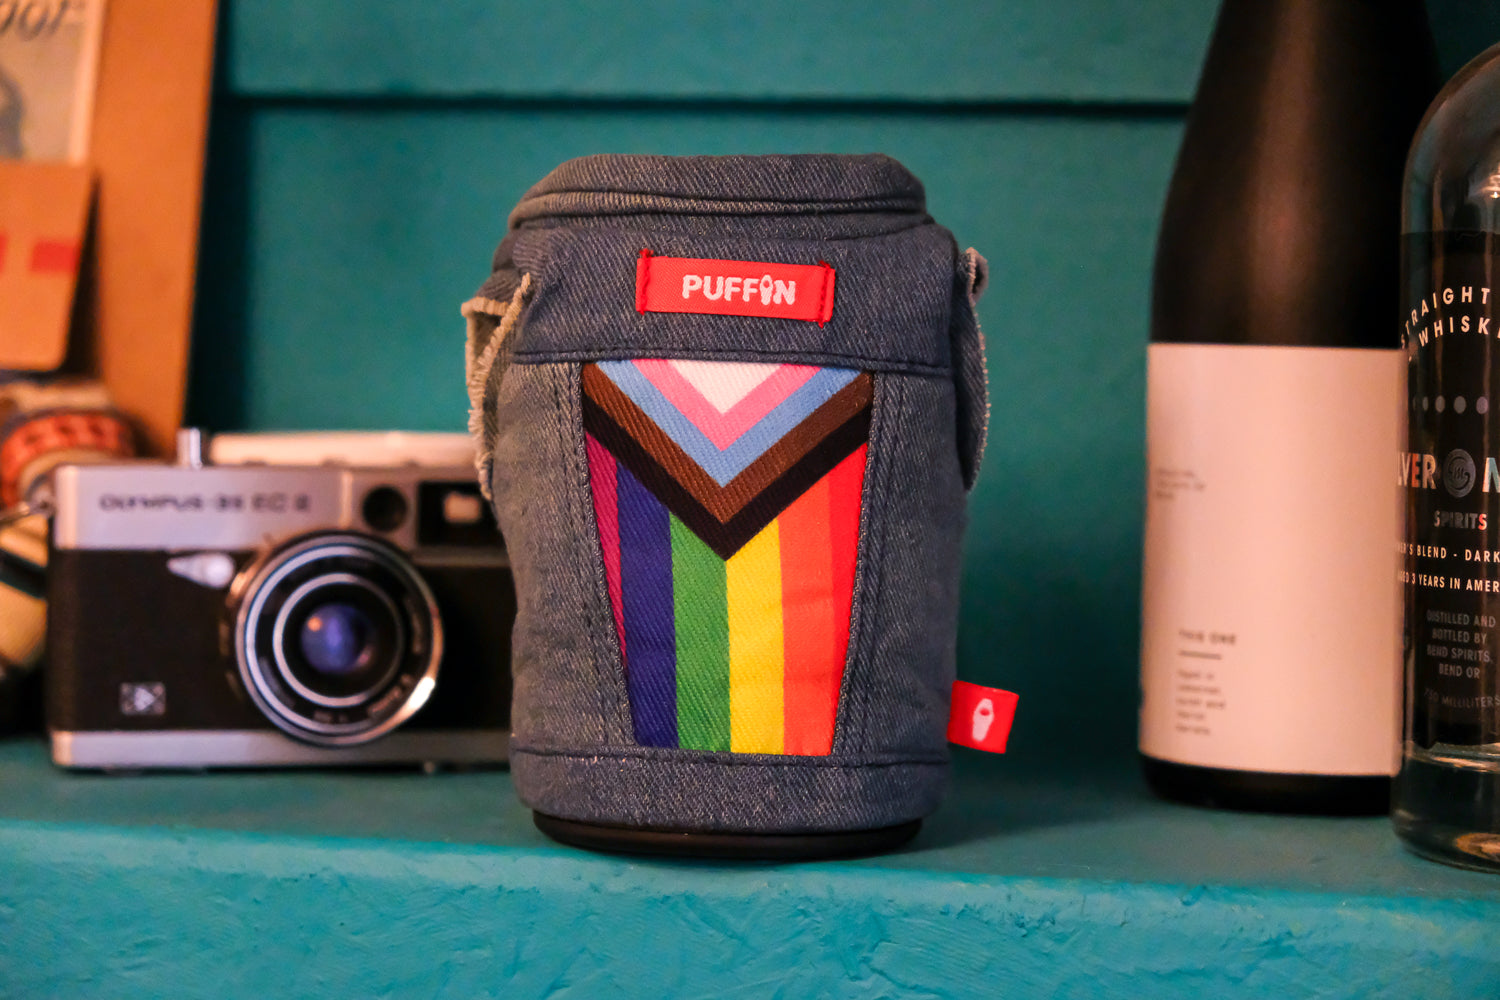 The Pride Vest - Puffin Drinkwear drink sleeves - with camera and wine on a bench